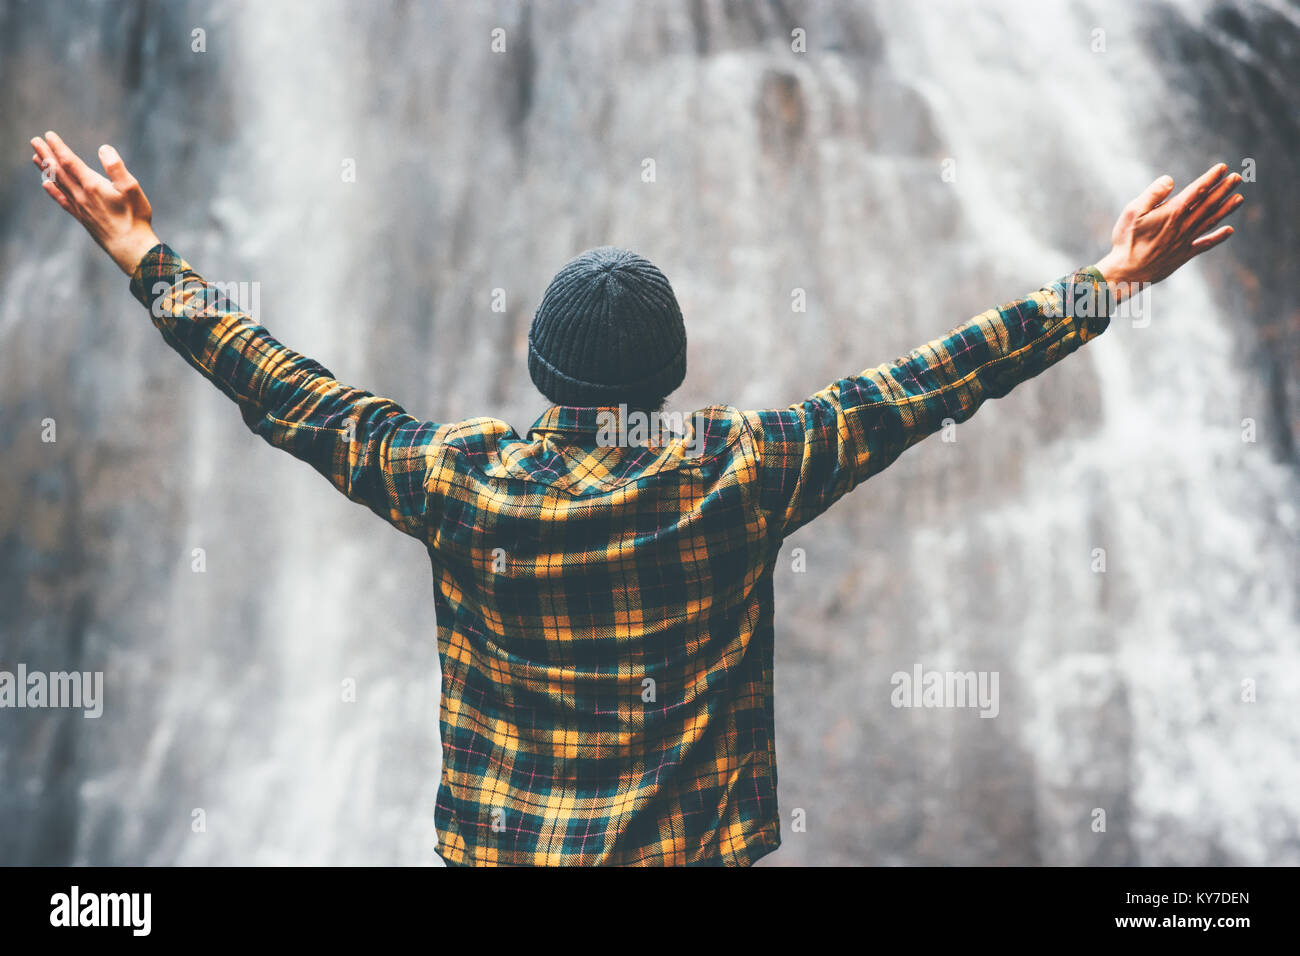 Man enjoying waterfall raised hands Travel Lifestyle adventure concept vacations into the wild wearing cozy shirt and hat Stock Photo